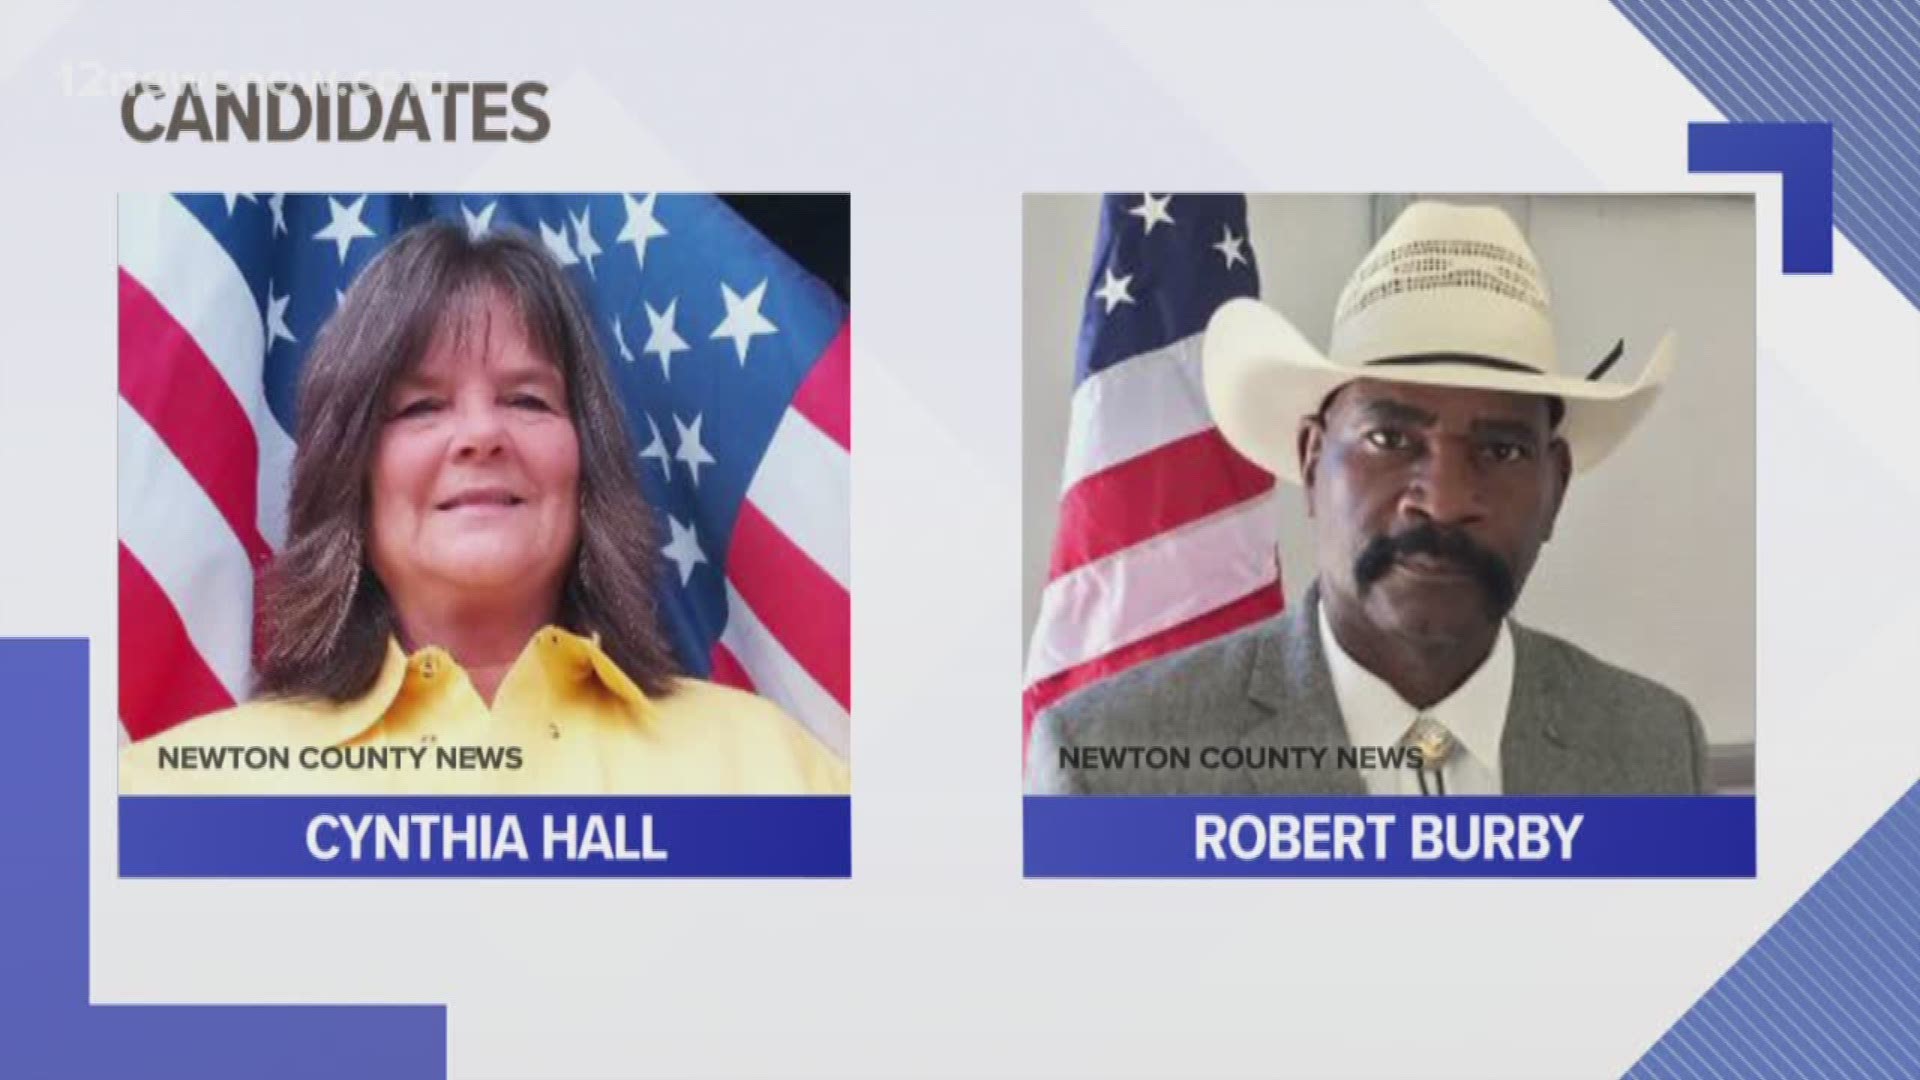 Cynthia Hall would become the county's first female sheriff. Robert Burby would become the first African American sheriff.